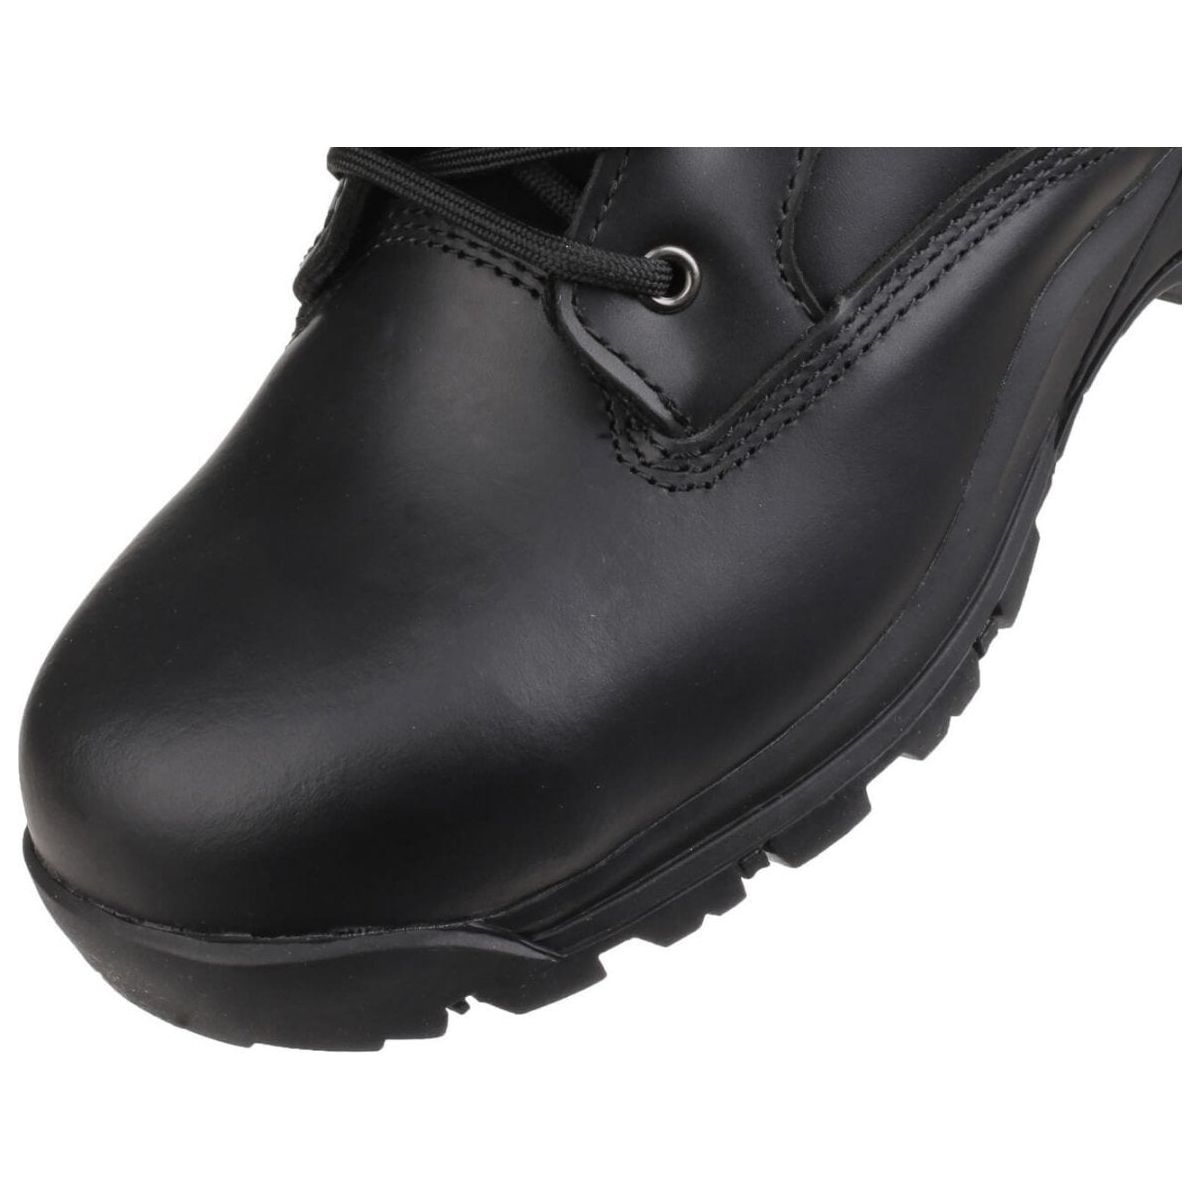 Amblers As104 Ryton Water-Resistant Safety Boots Womens - workweargurus.com